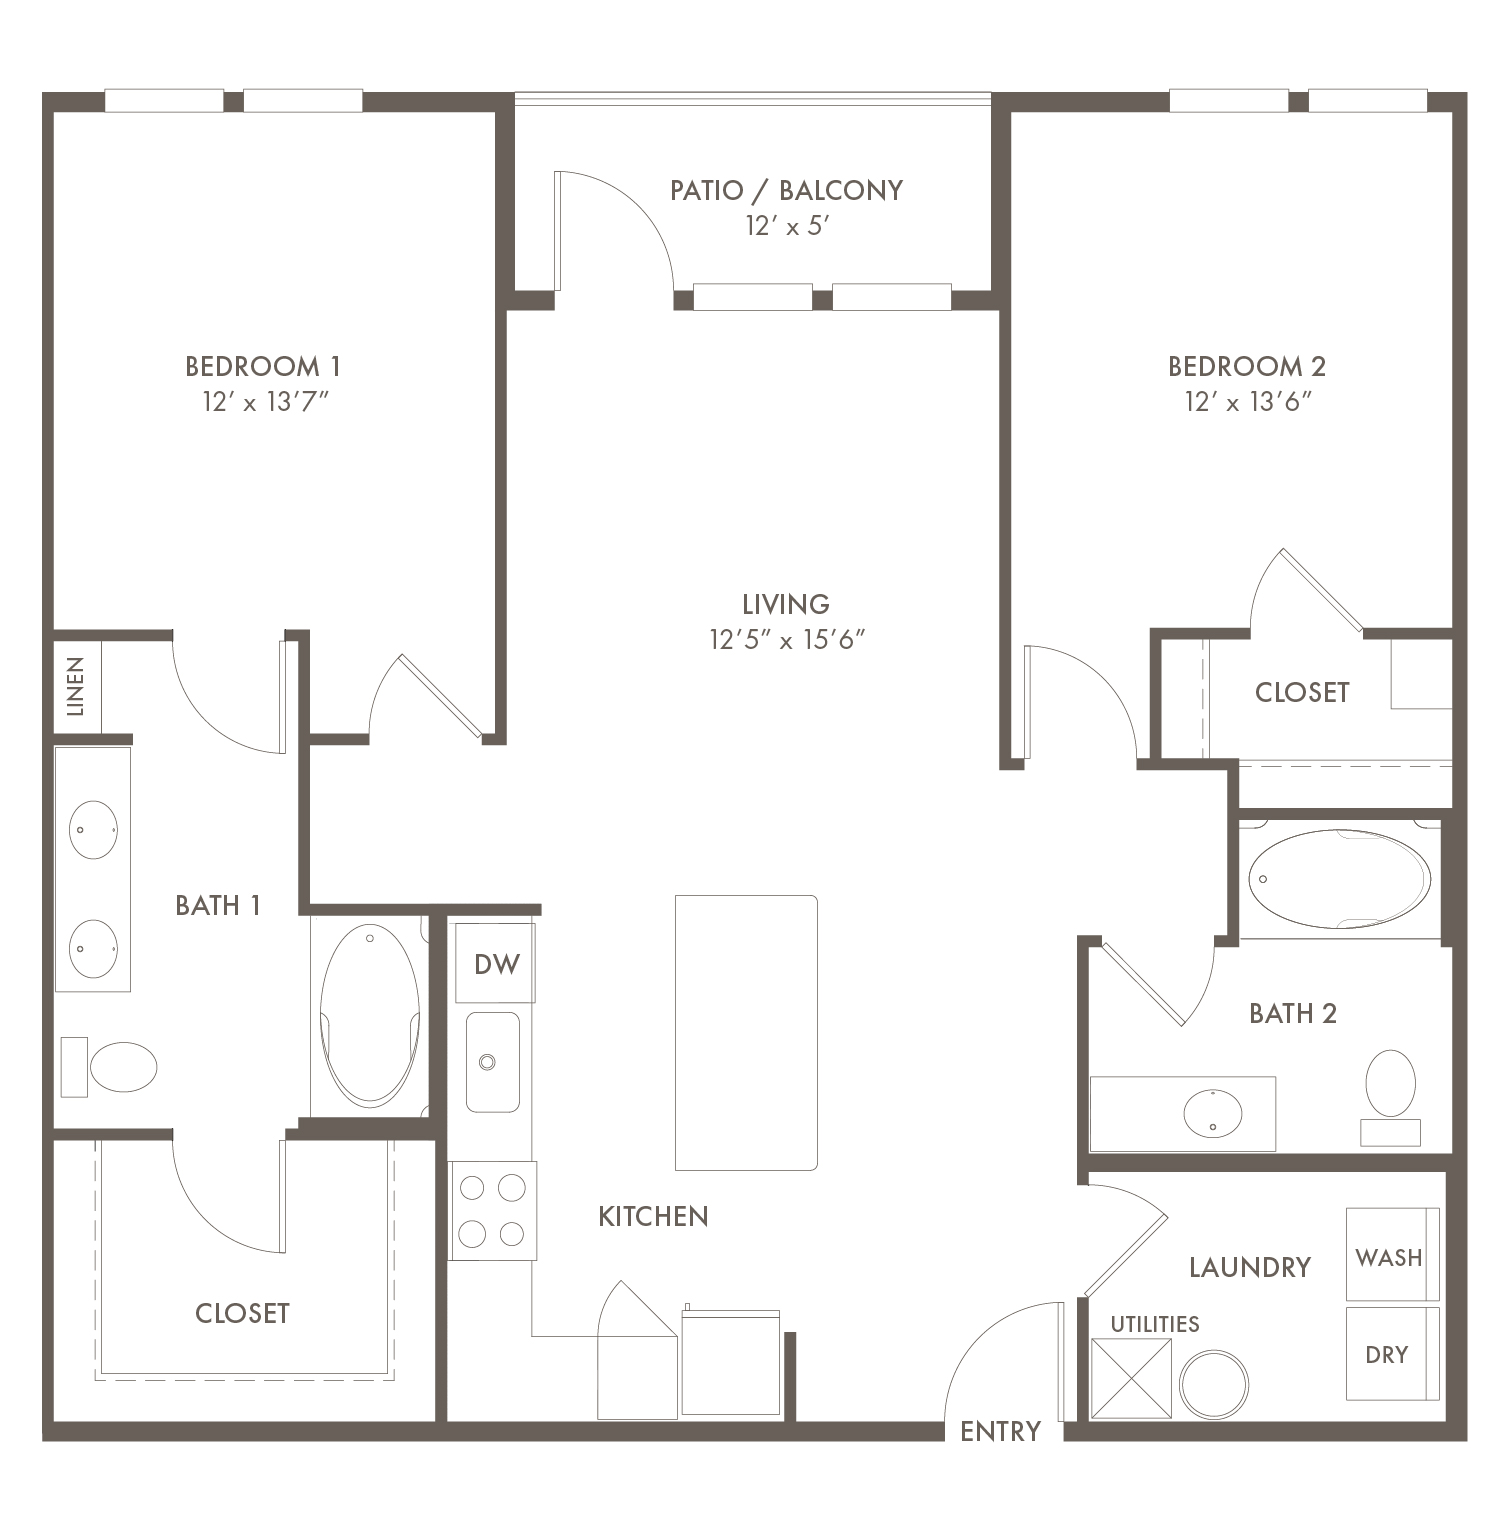 A B1 unit with 2 Bedrooms and 2 Bathrooms with area of 1,164 sq. ft